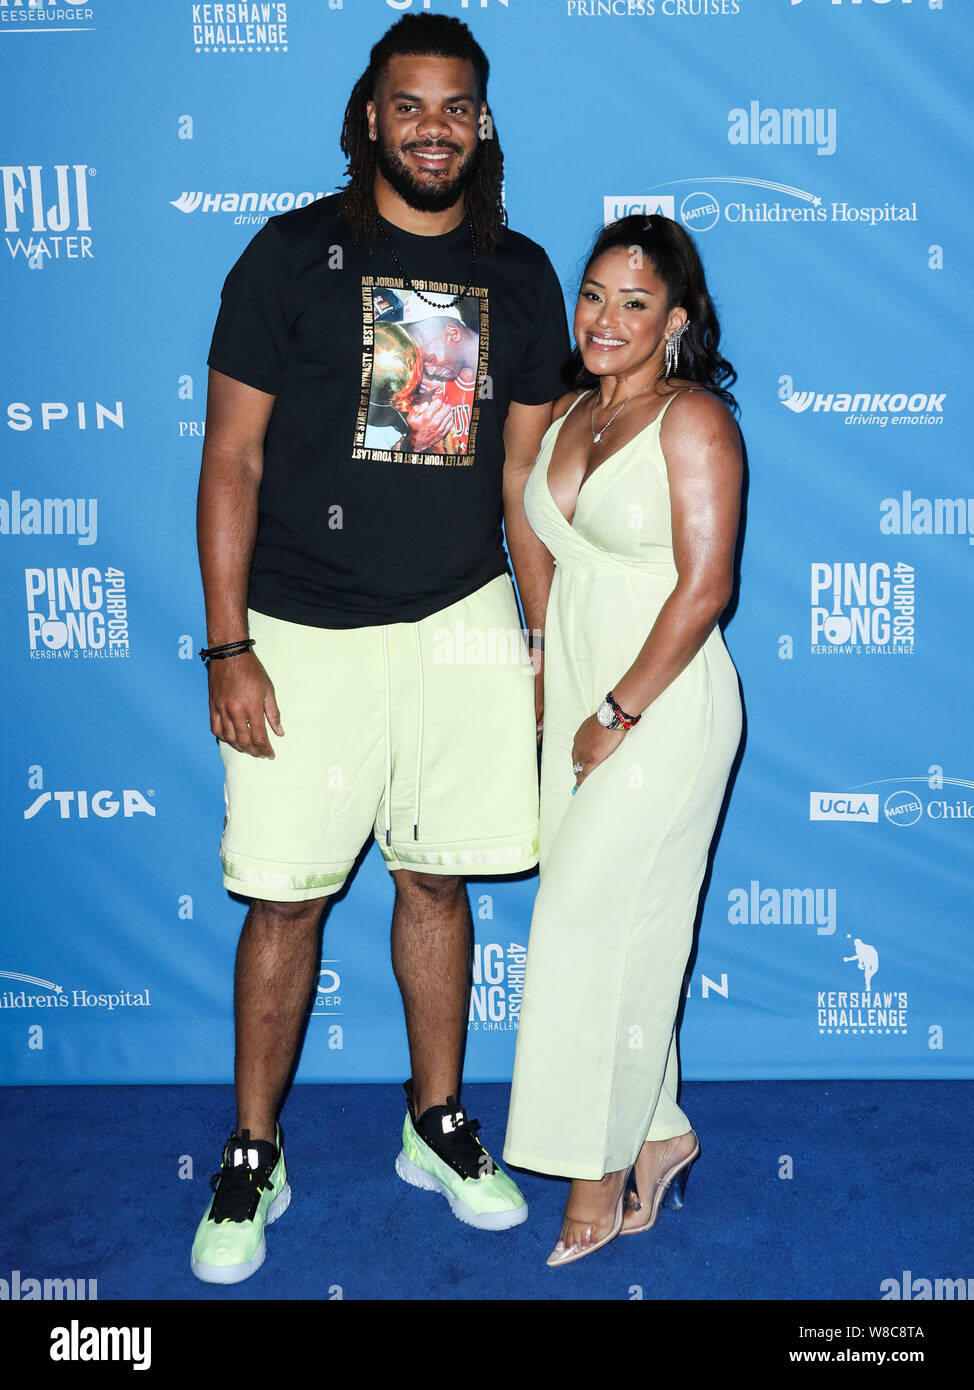 Los Angeles, United States. 08th Aug, 2019. LOS ANGELES, CALIFORNIA, USA -  AUGUST 08: Professional baseball pitcher Kenley Jansen and wife Gianni  Jansen arrive at Clayton Kershaw's 7th Annual Ping Pong 4